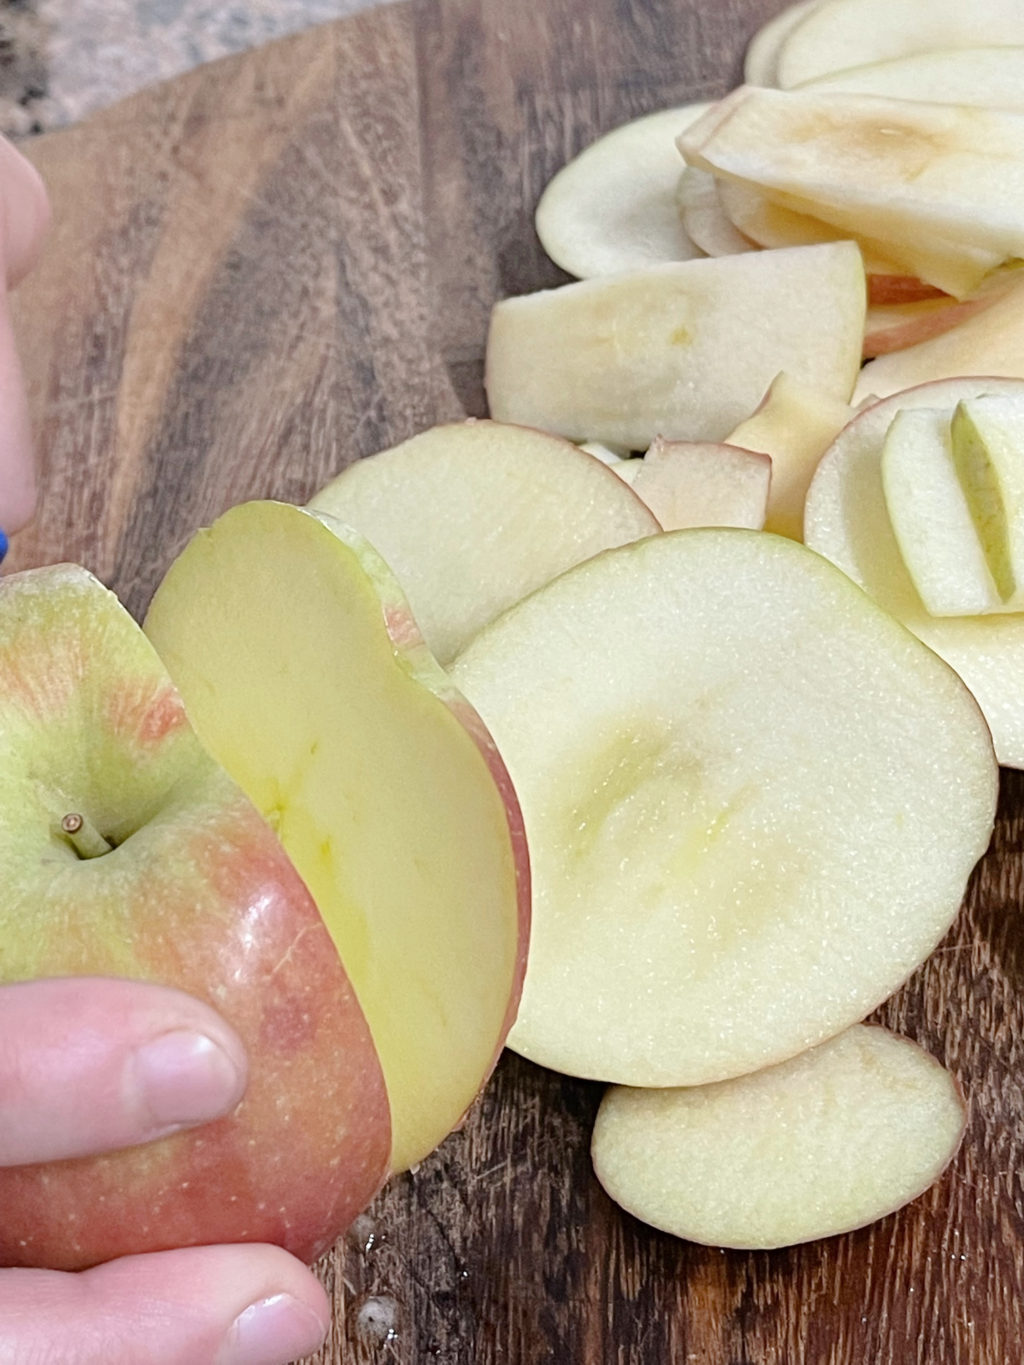 Slicing apples on a cutting board.